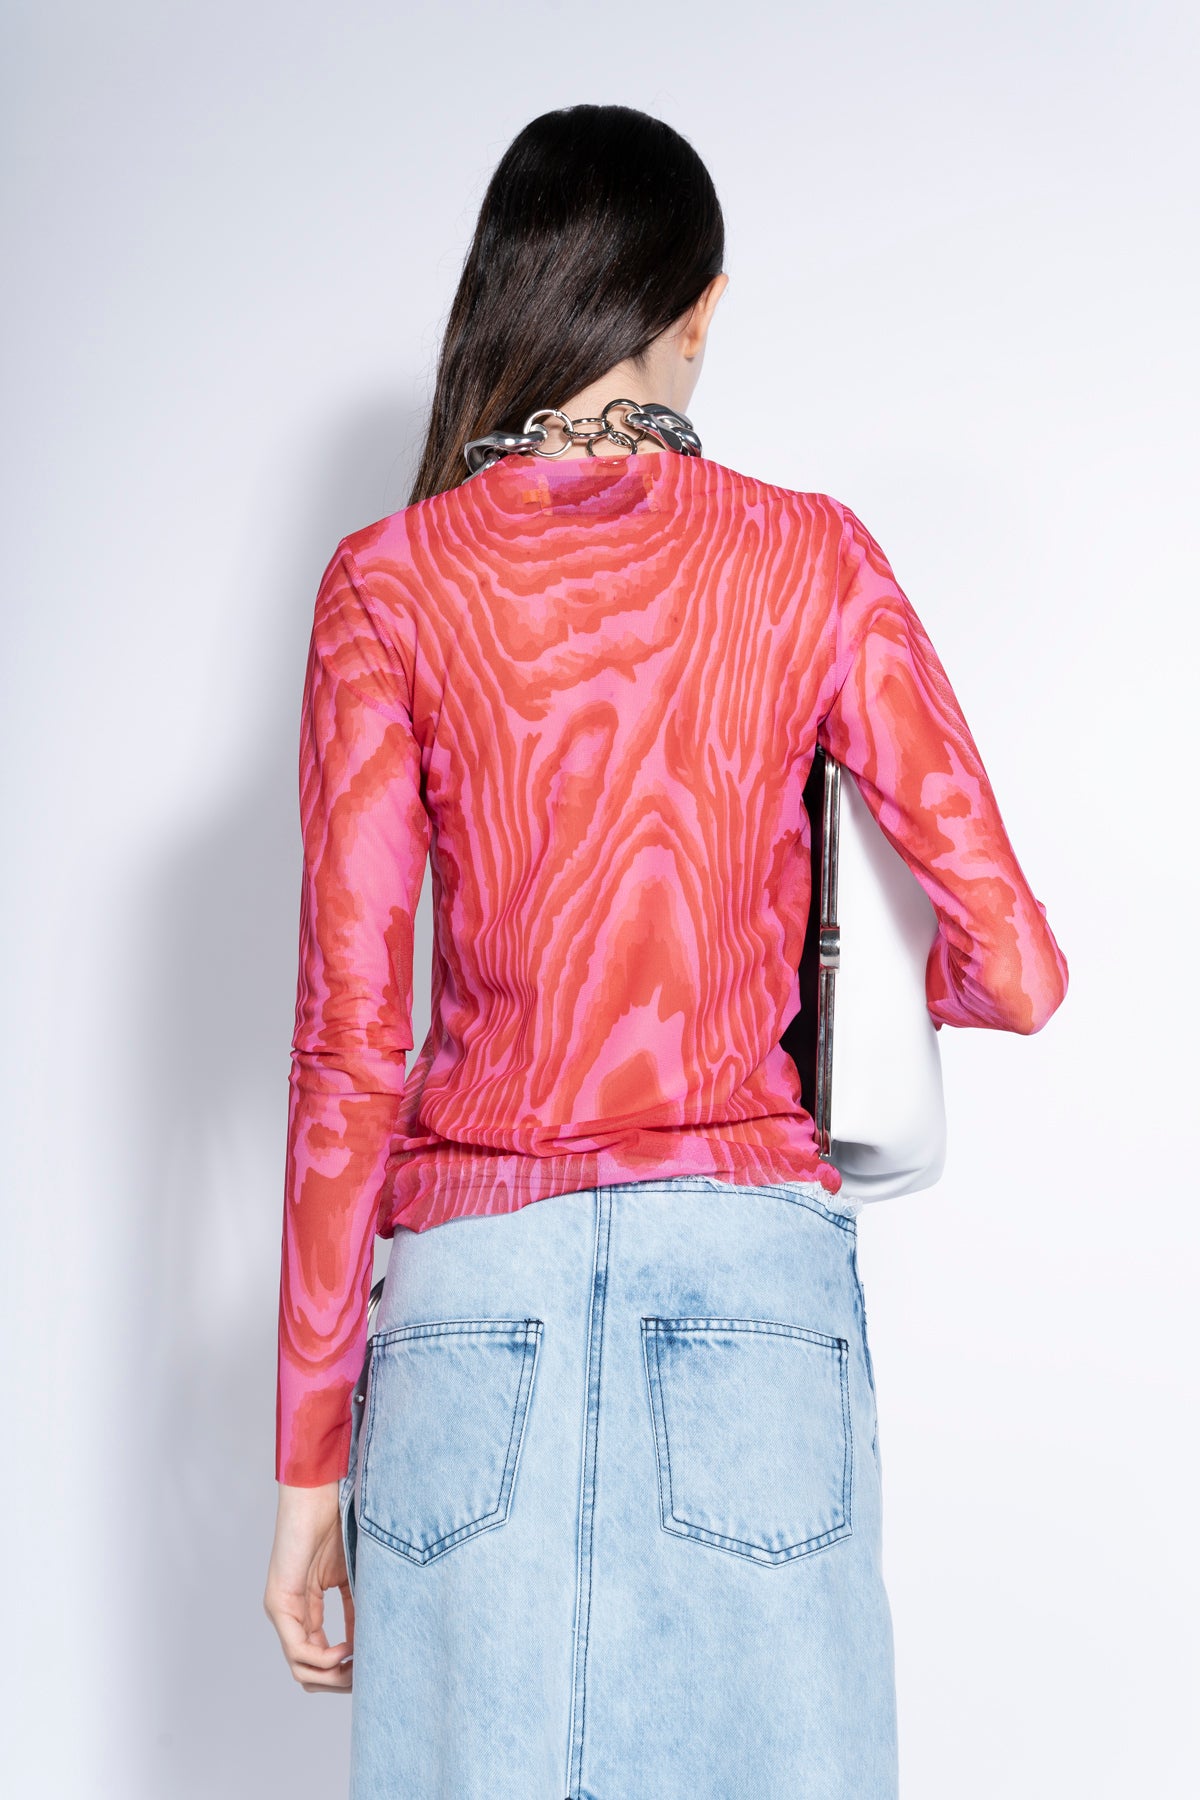 PINK AND RED LONG SLEEVE MESH TOP marques almeida